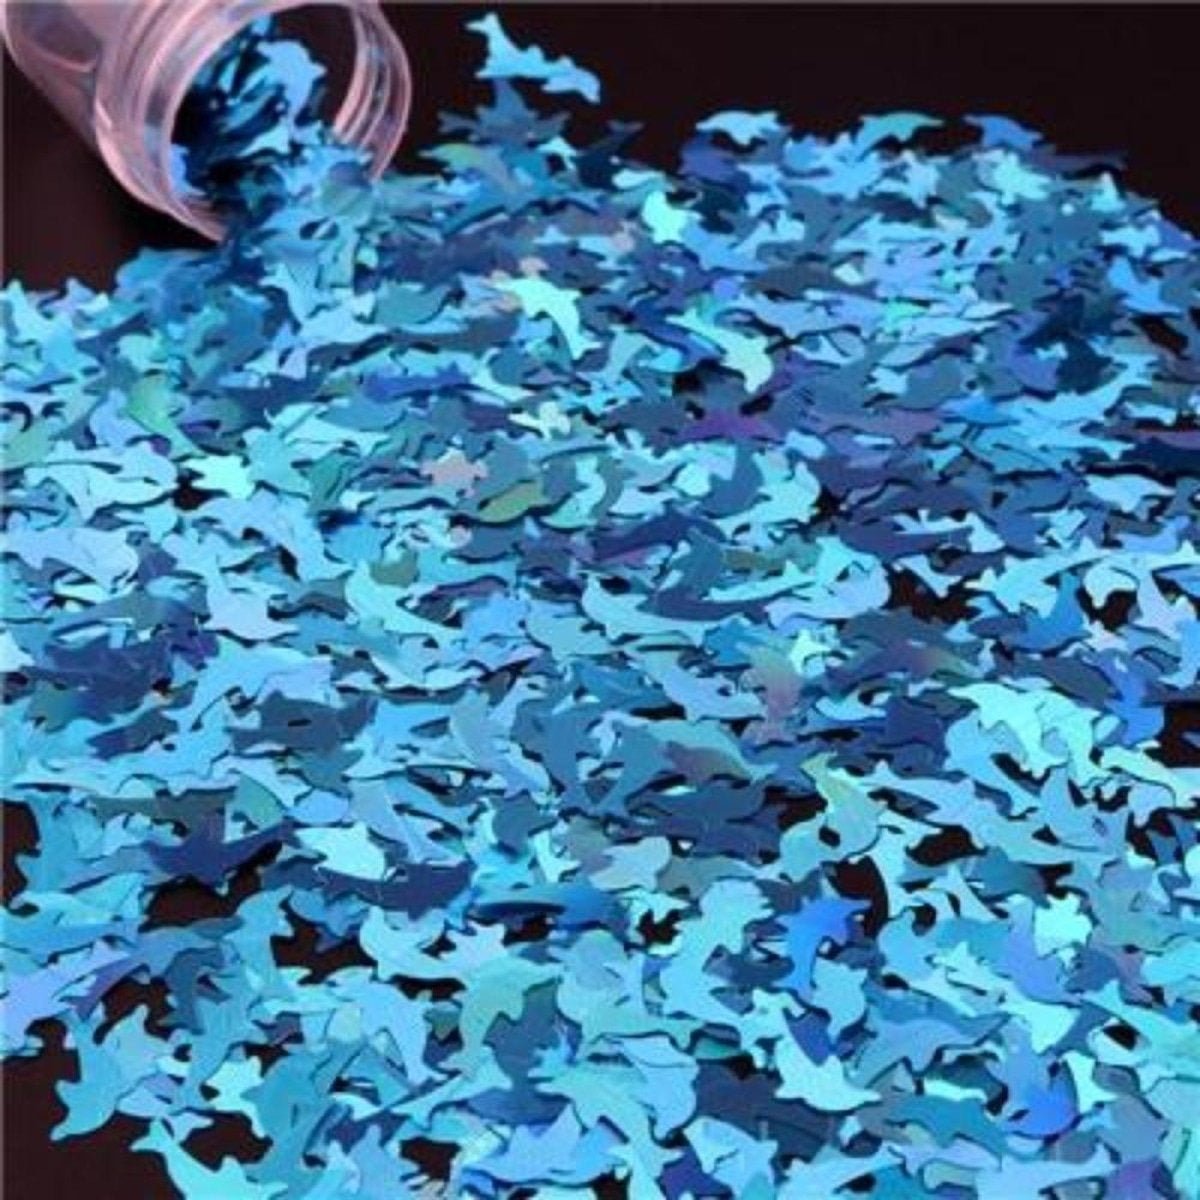 8g Holographic Nail Art Sequins 10mm Dolphin Turtle Glitter Sequin Decoration - Aqua Dolphin - Asia Sell